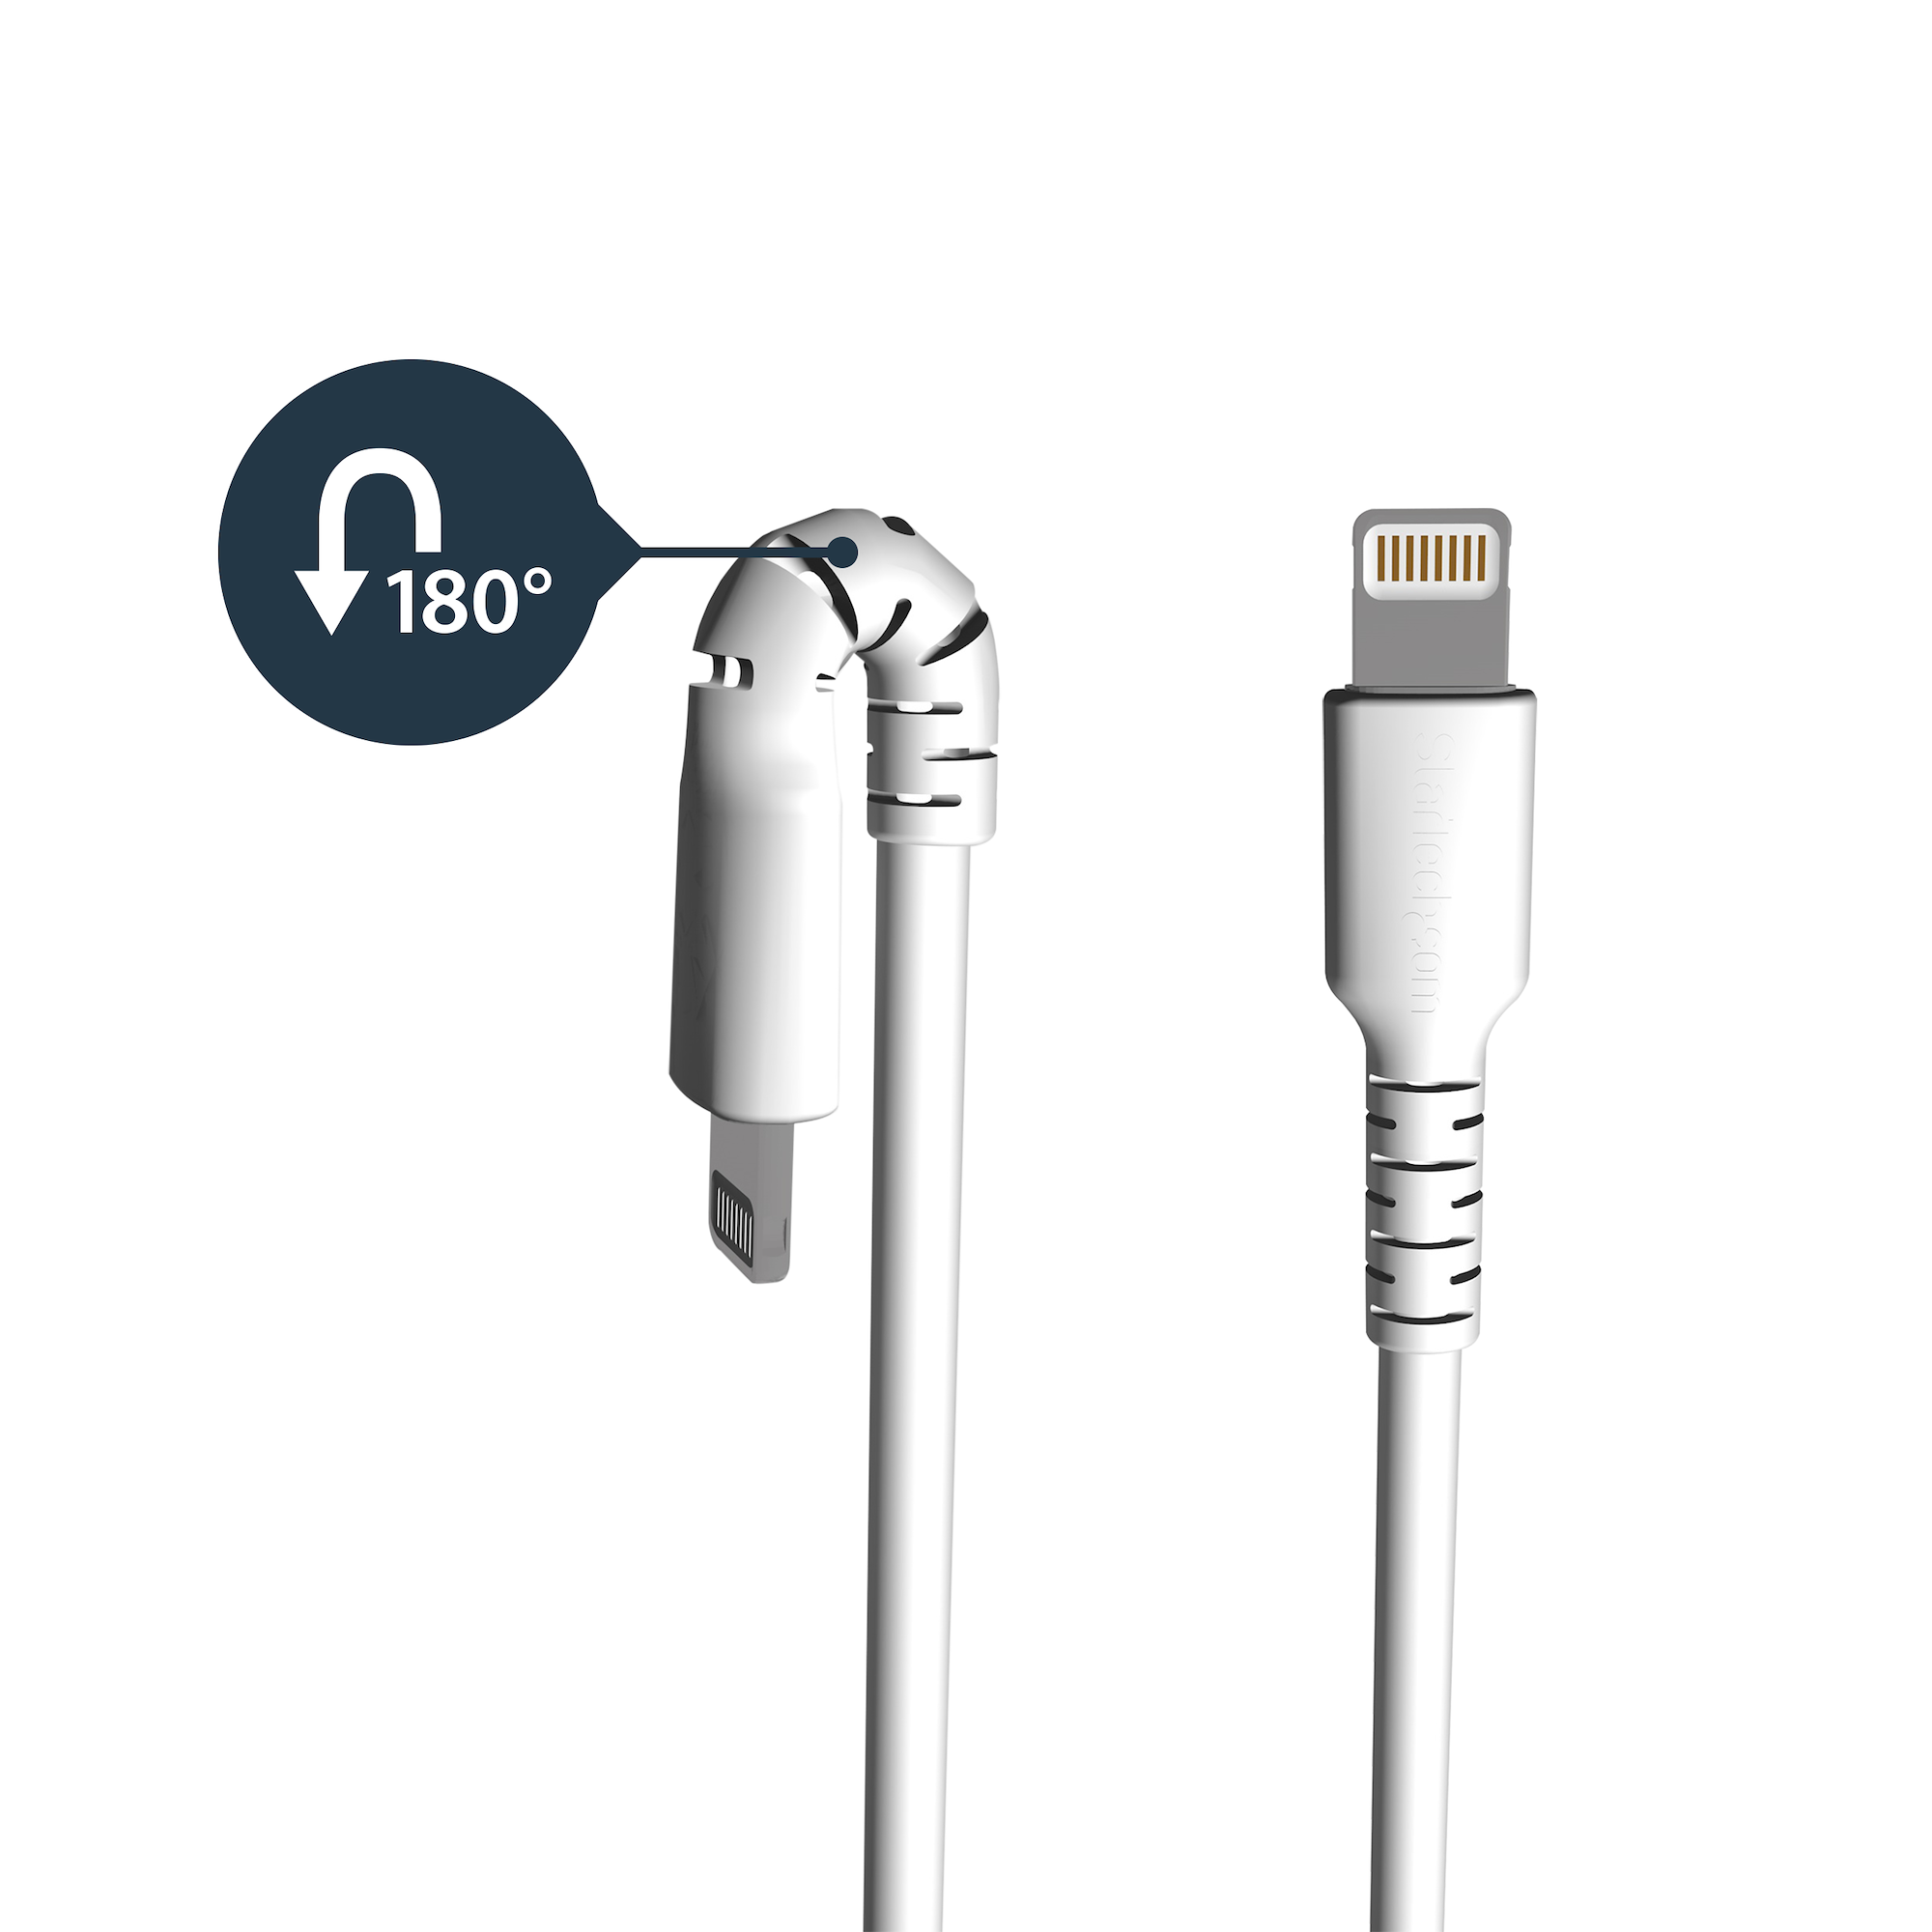 1m/3ft Durable USB-A to Lightning Cable - Lightning Cables, Cables